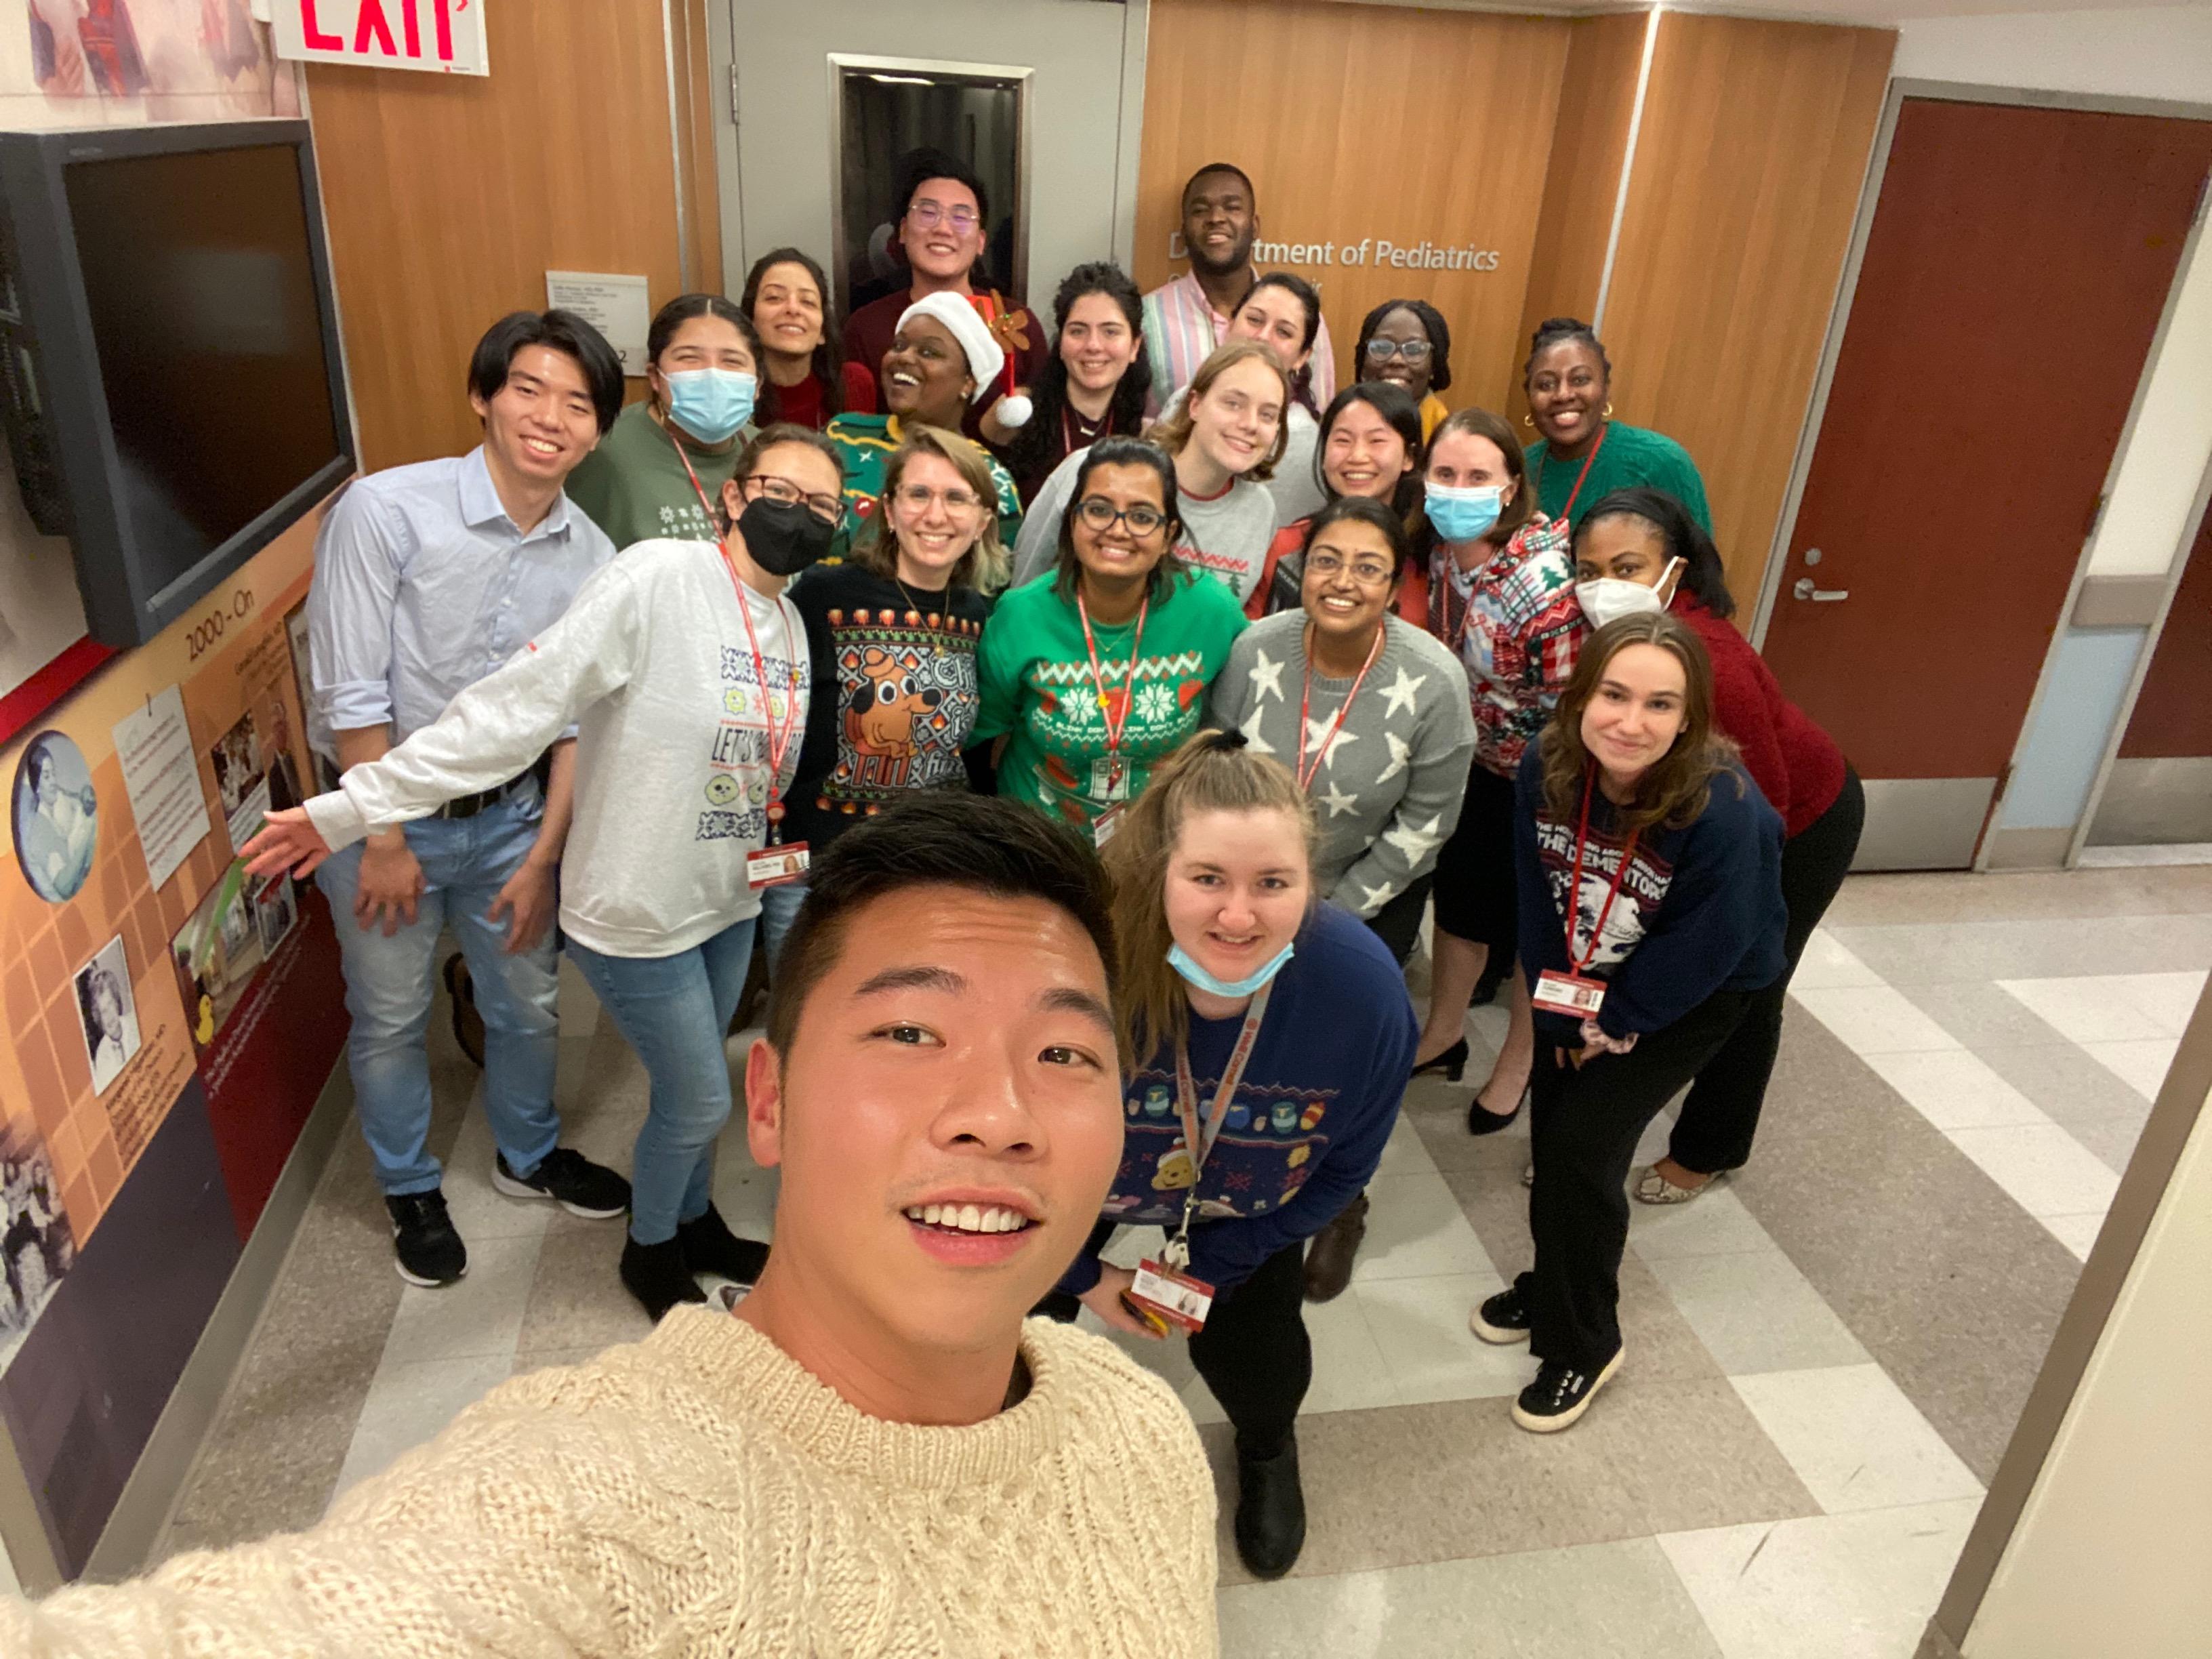 Fouda Lab Team at their Winter Holiday party selfie